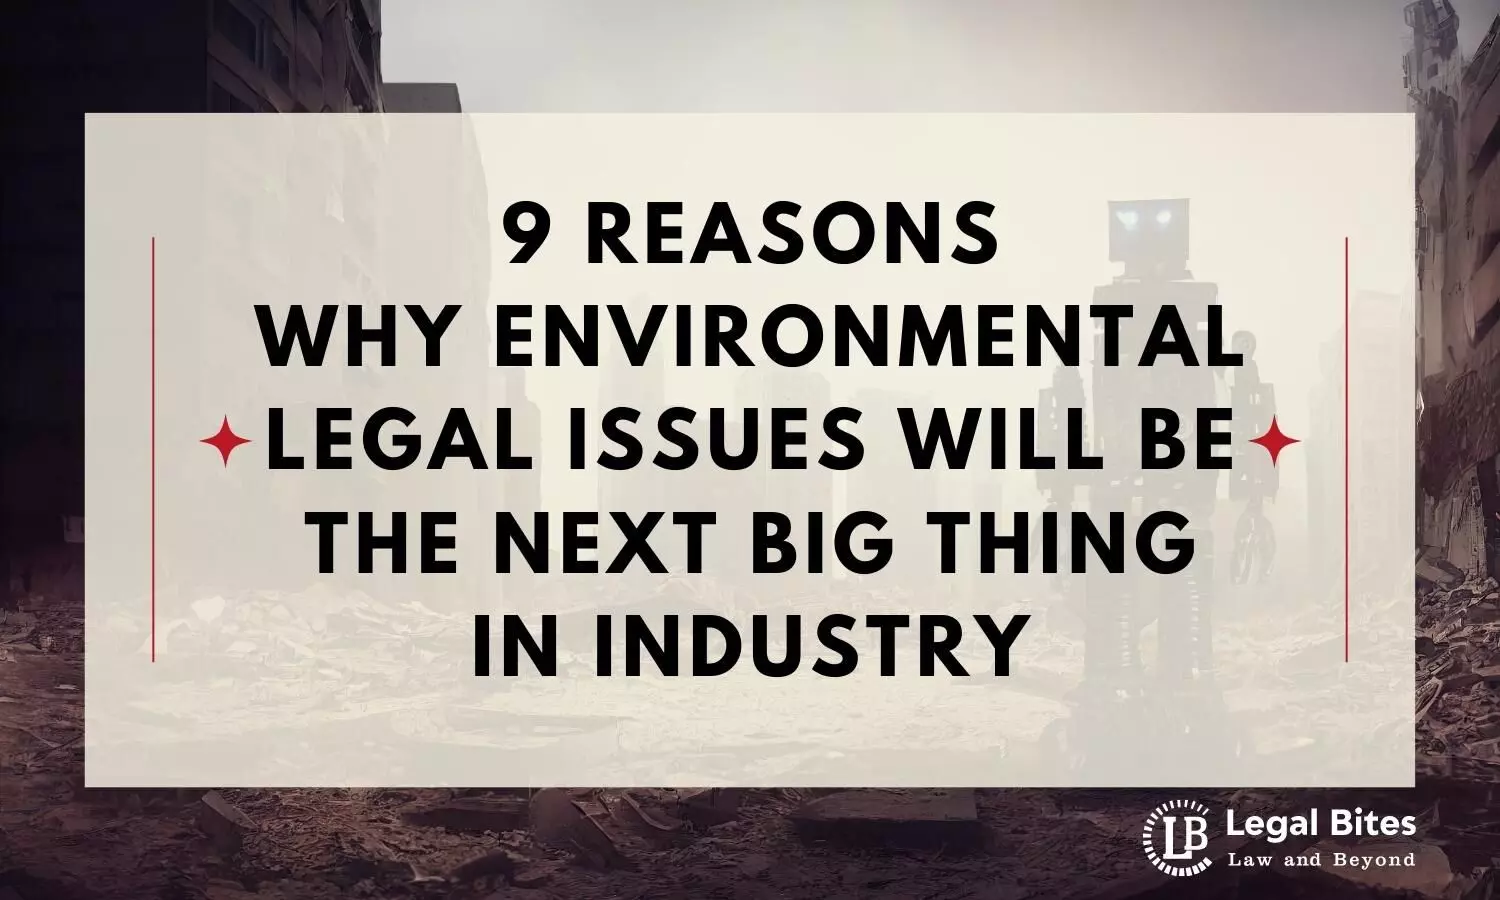 9 Reasons Why Environmental Legal Issues Will be the Next Big Thing in Industry